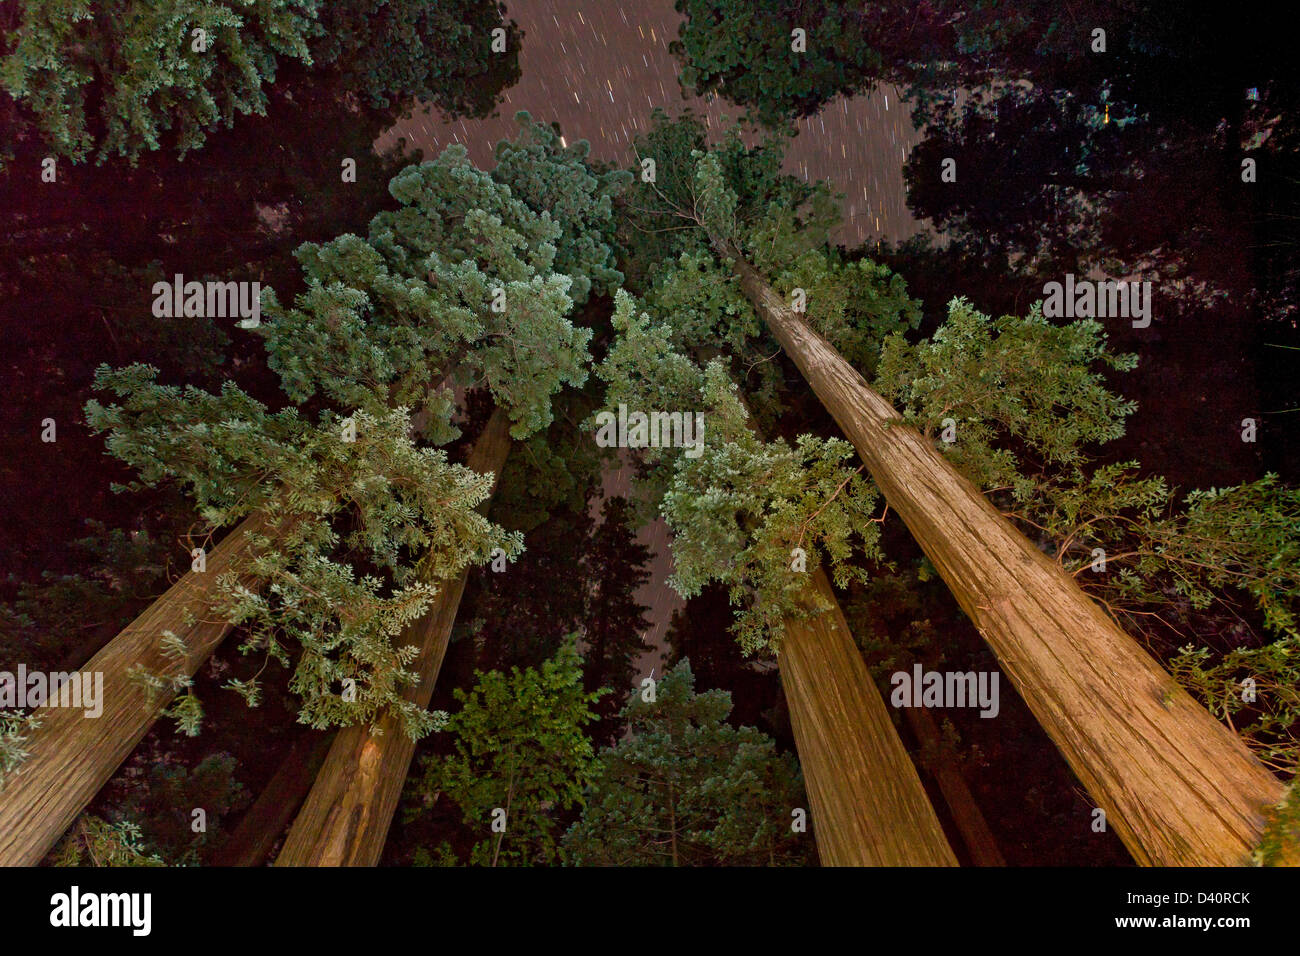 Coast redwood trees at night, with starry sky; Humboldt Redwoods State Park, California, USA Stock Photo